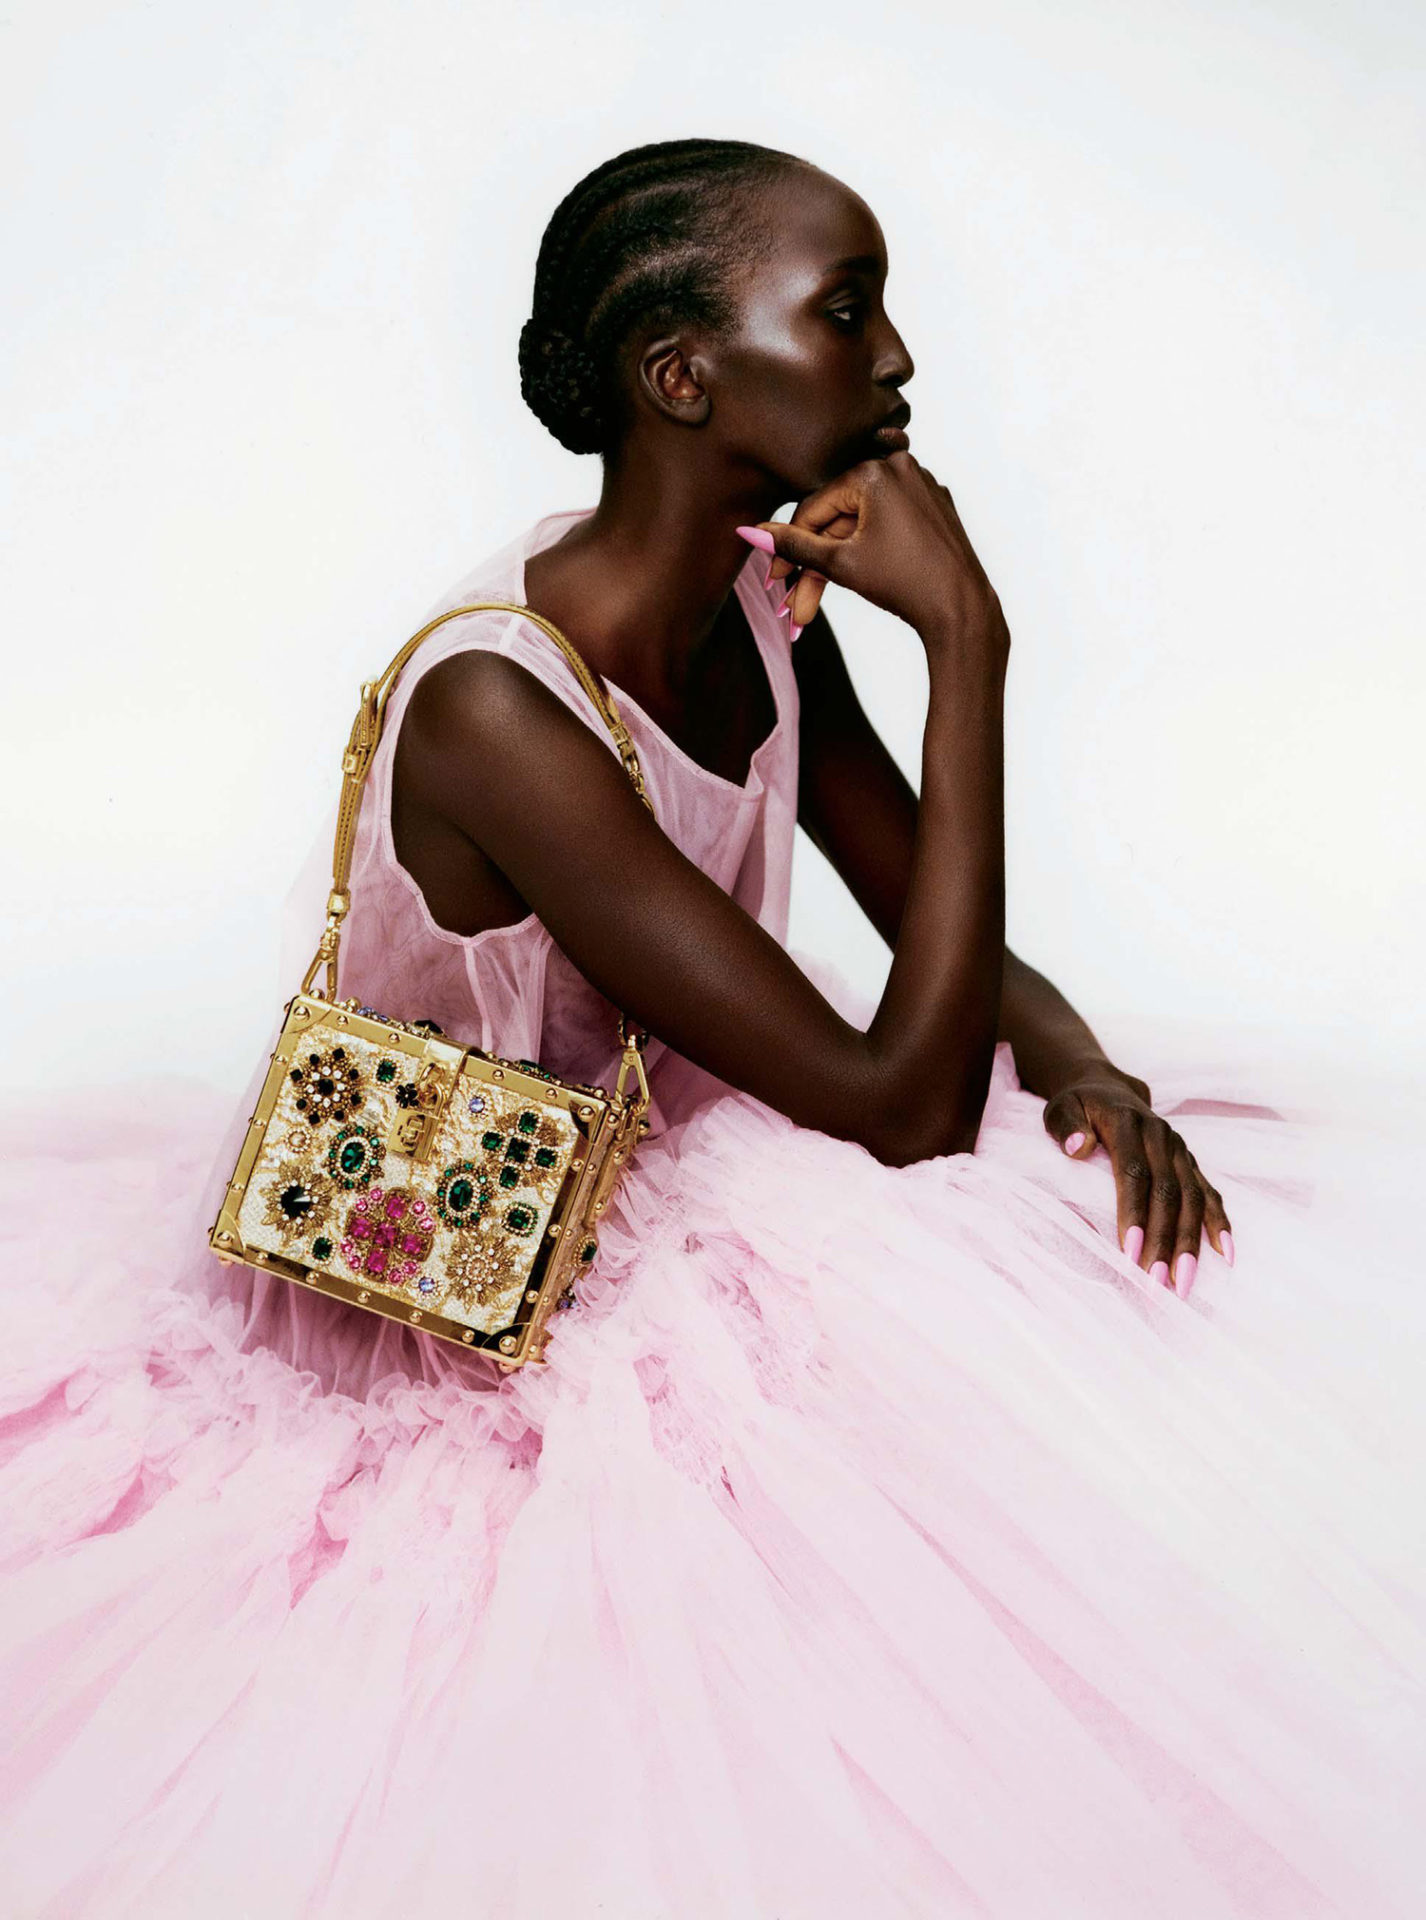 Nyaueth Riam by Santi de Hita for The Sunday Times Style March 13th, 2022